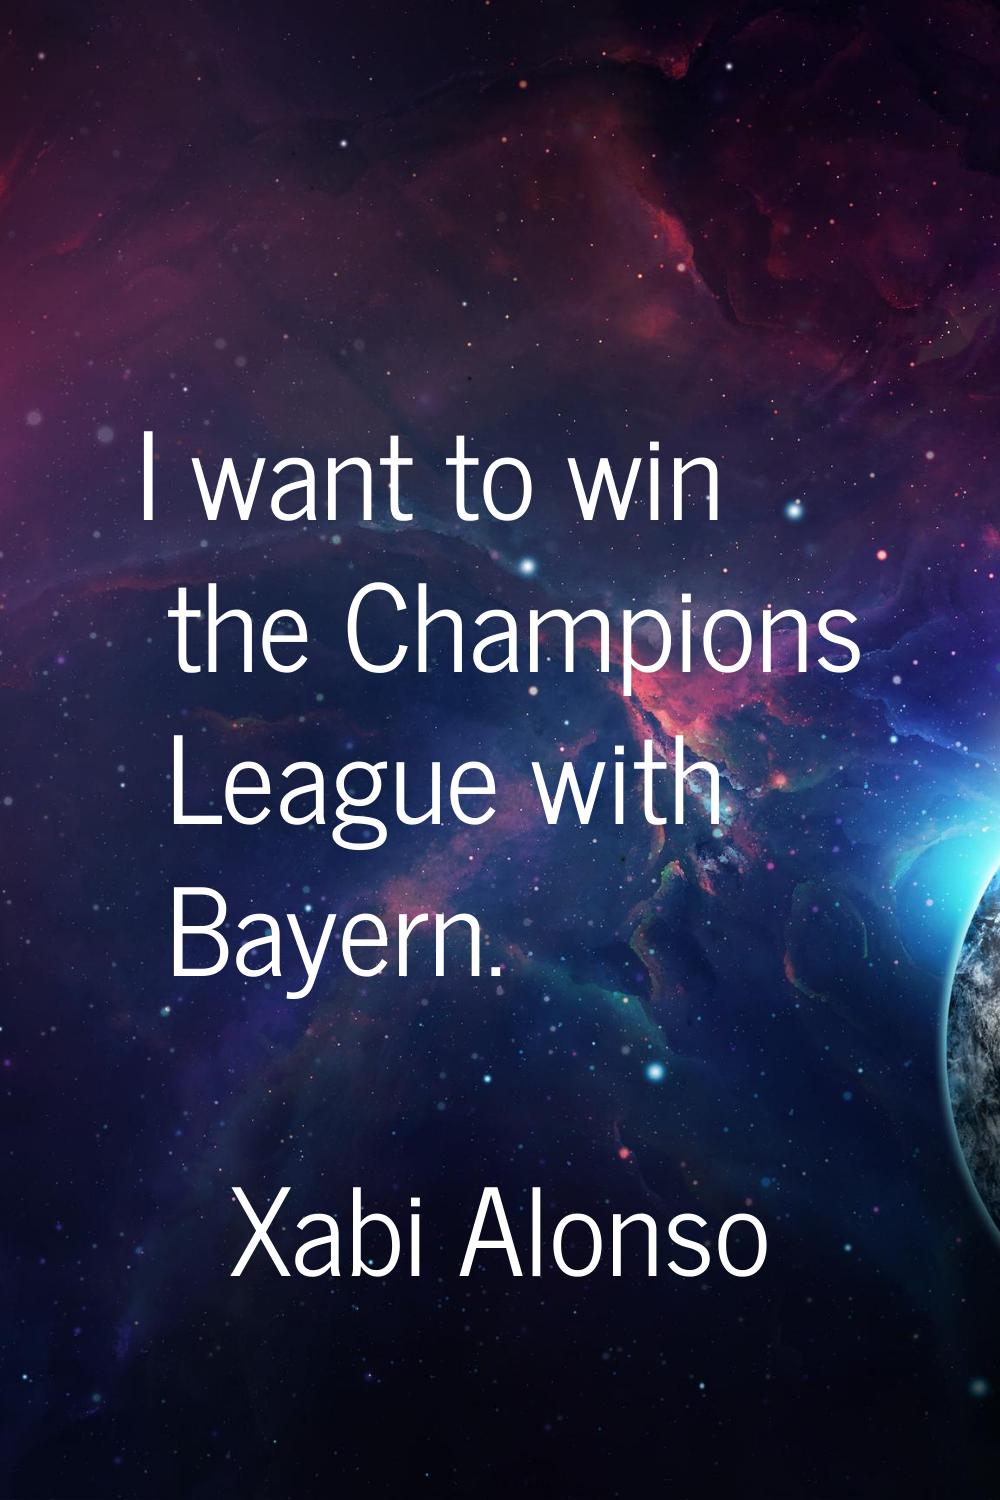 I want to win the Champions League with Bayern.